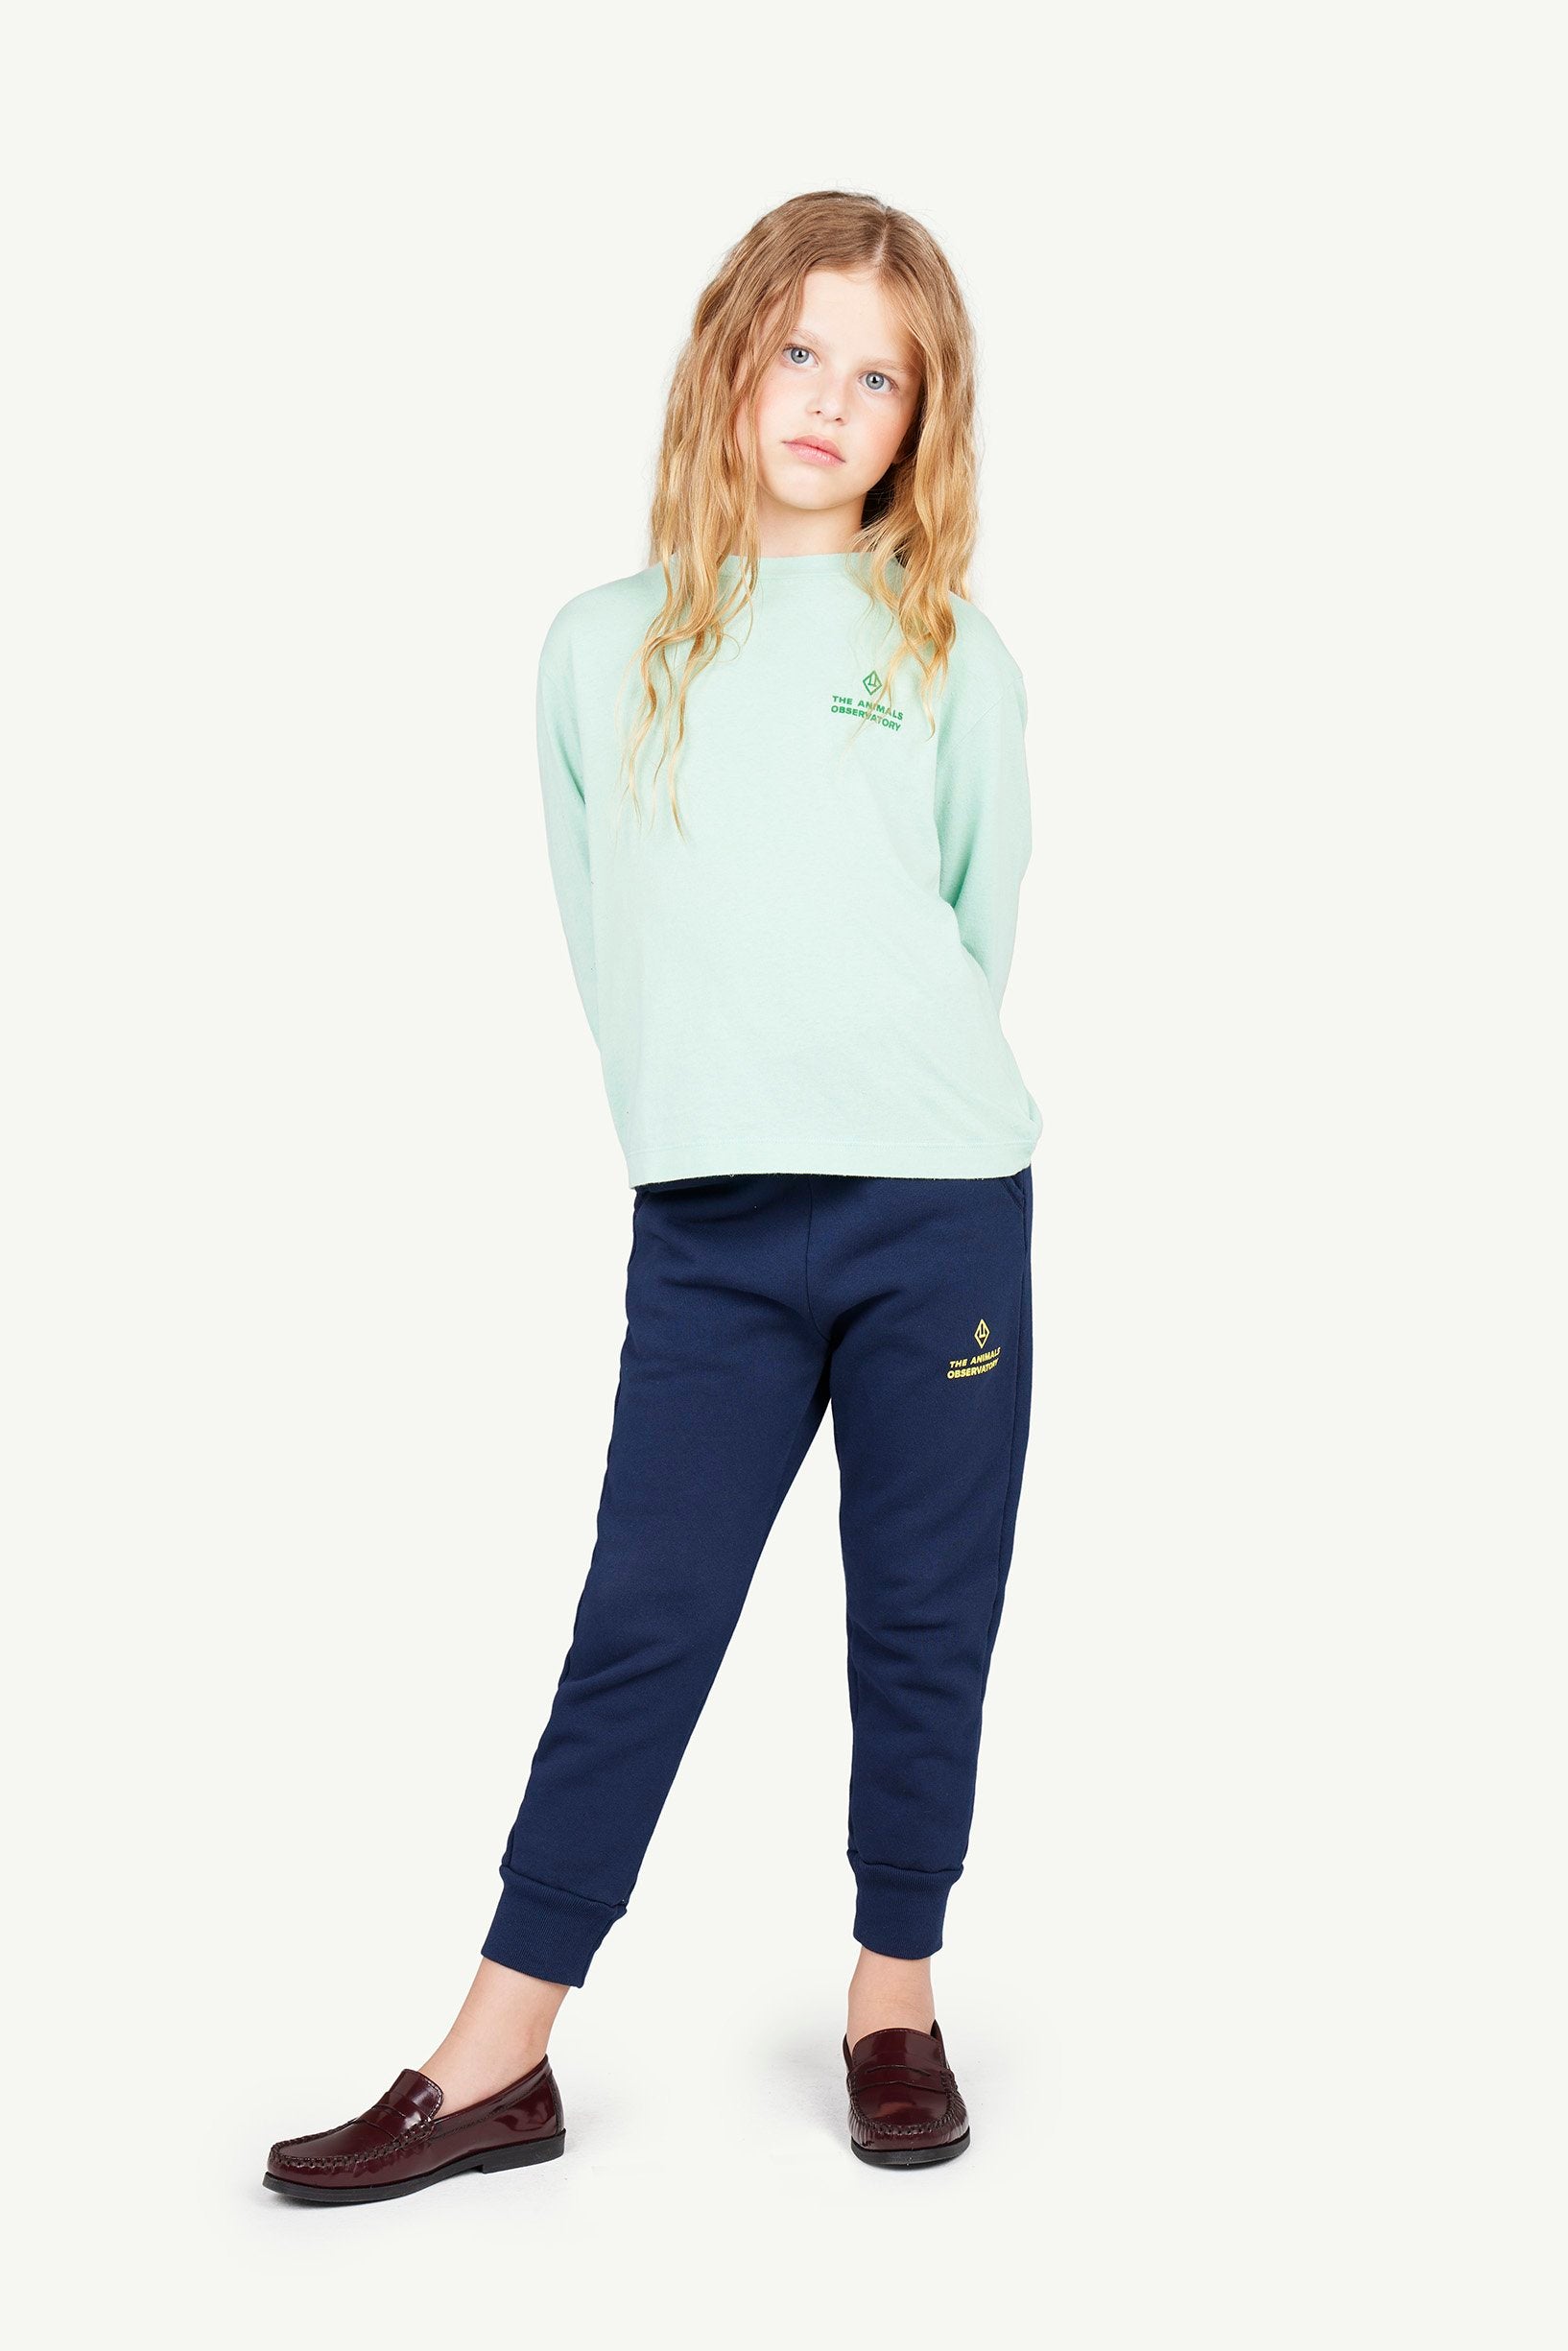 Turquoise Aries  Kids Long Sleeve T-Shirt MODEL FRONT